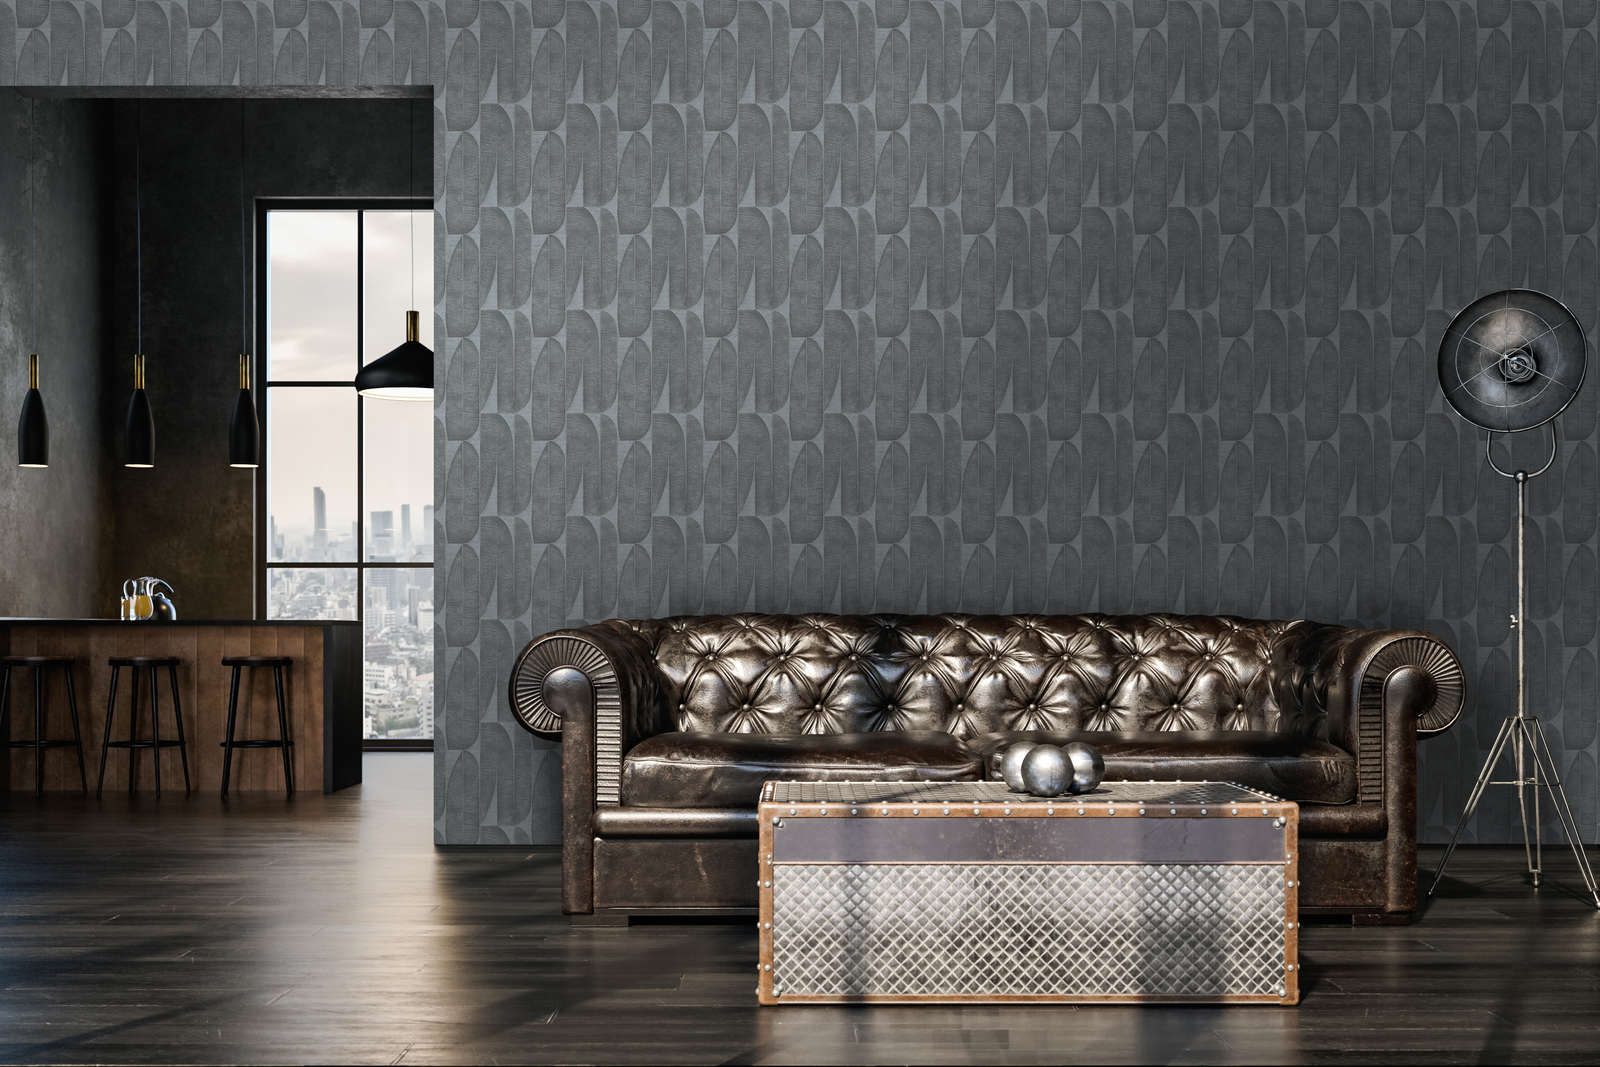             Wallpaper with geometric pattern floral in leaf look - black, anthracite
        